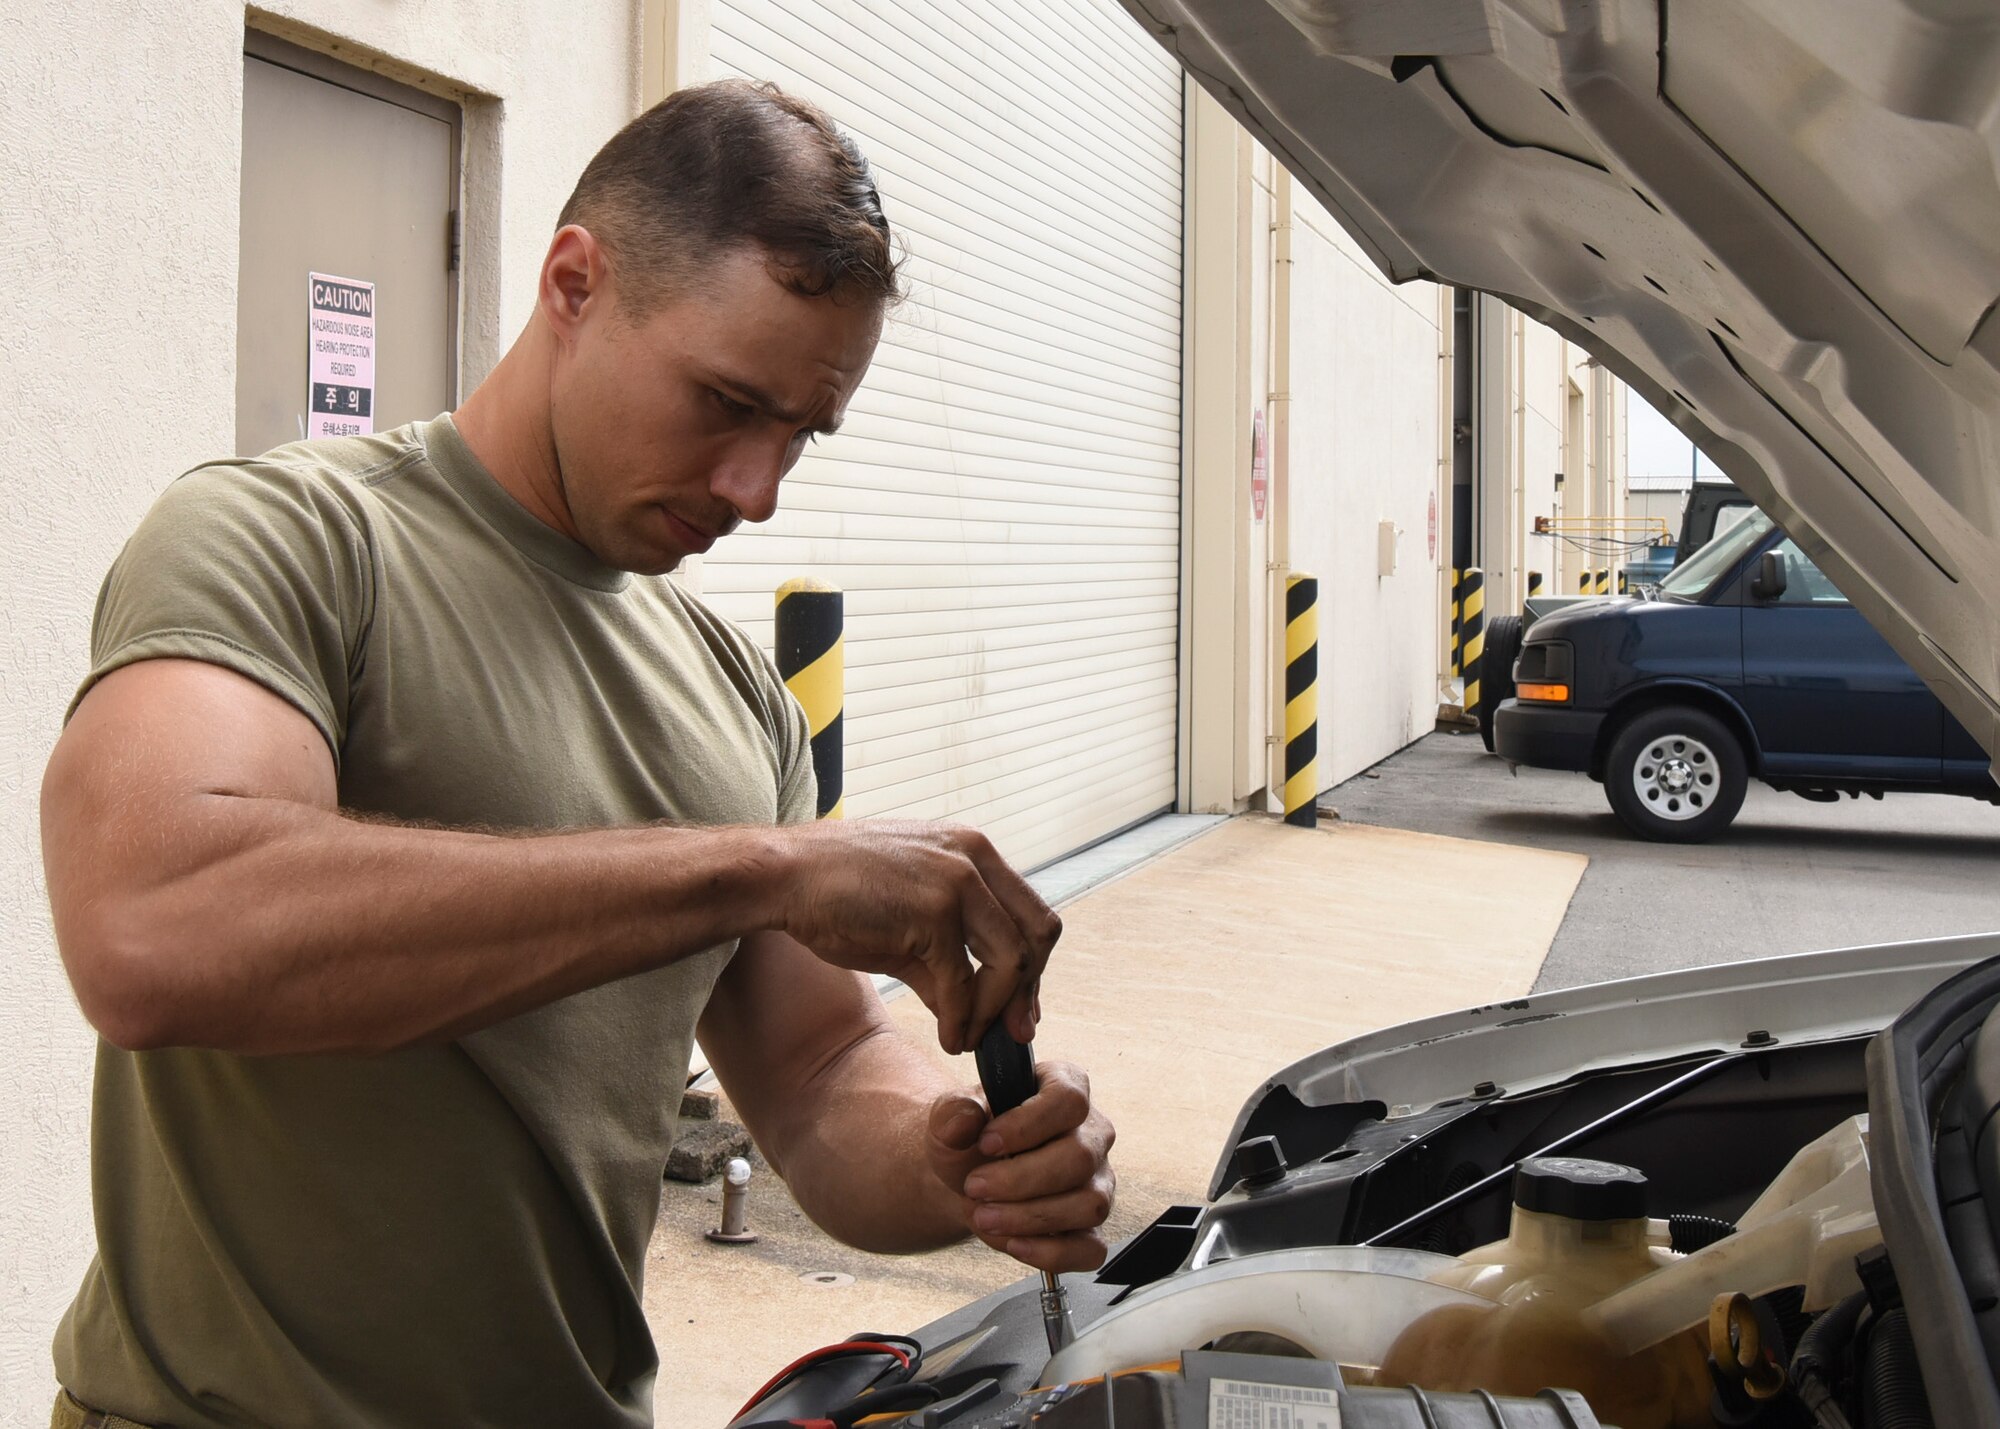 Tech. Sgt. John Bishop, 8th Logistics Readiness Squadron NCO in charge of vehicle maintenance, attaches the coolant reservoir to a truck at Kunsan Air Base, Republic of Korea, June 4, 2020. The unit helps maintain 485 vehicles across the Wolf Pack. (U.S. Air Force photo by Staff Sgt. Anthony Hetlage)